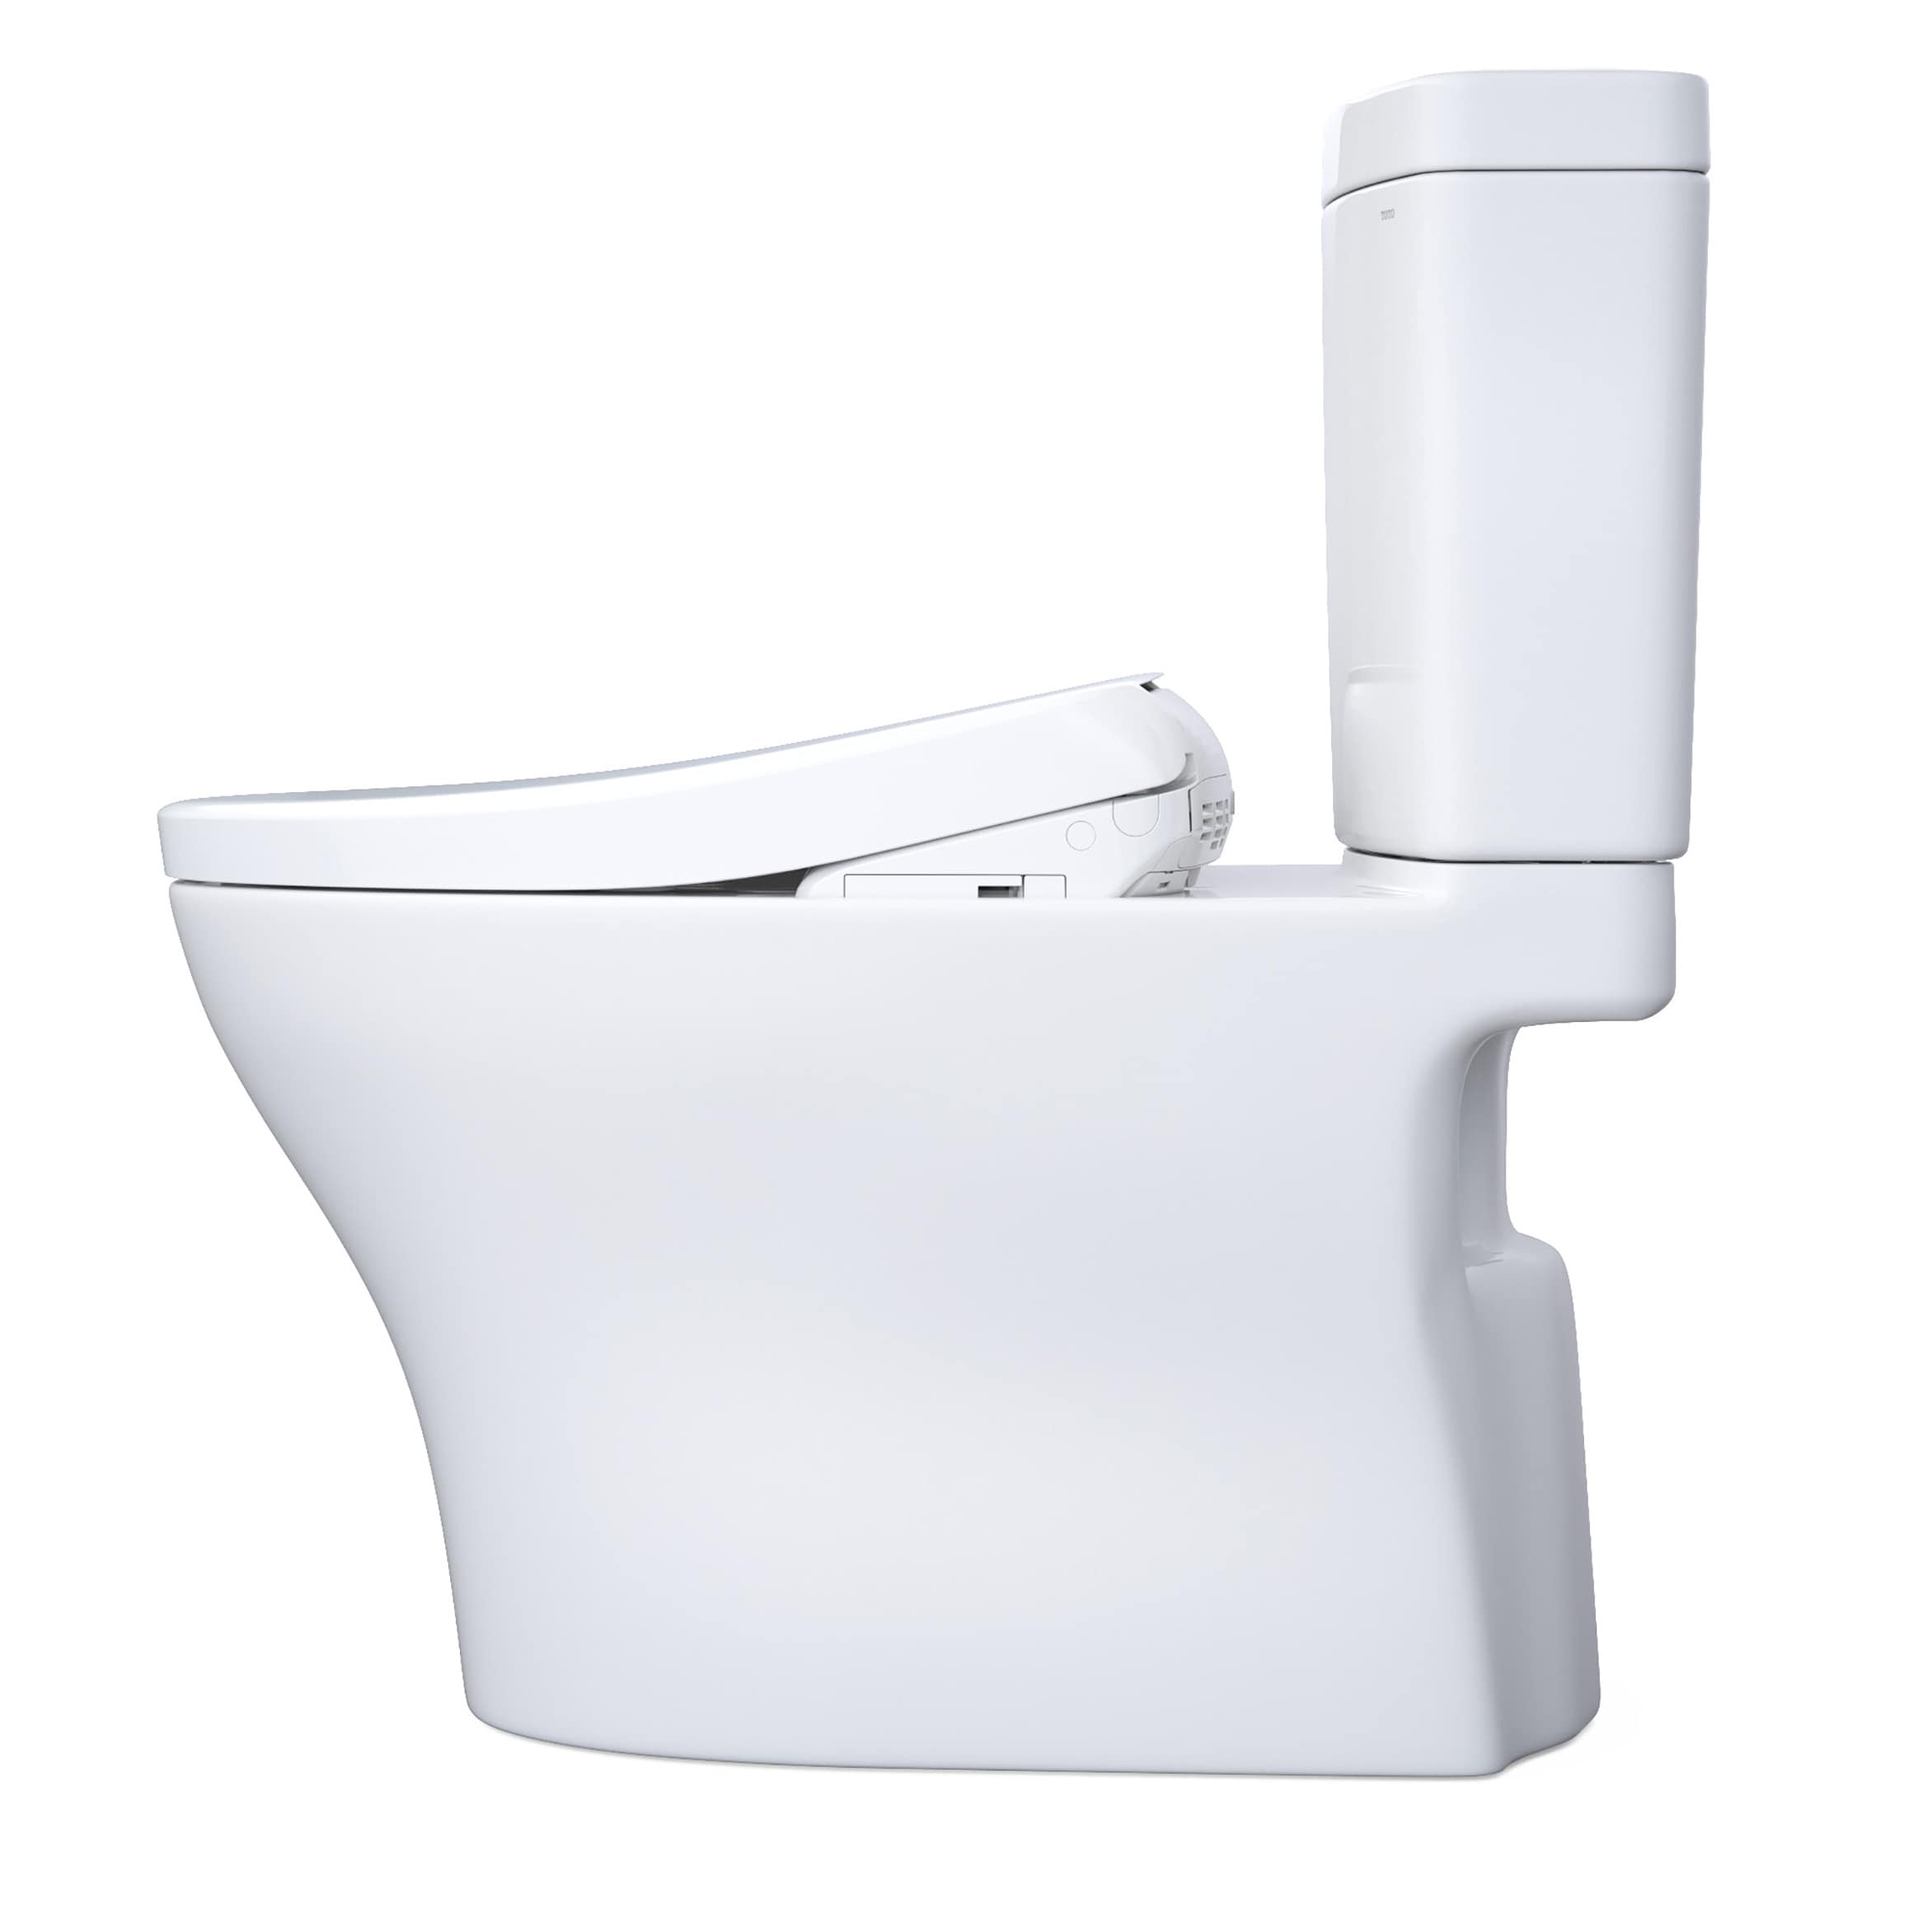 Toto MW4464726CEMGN#01 Washlet+ Aquia IV Two-Piece Elongated Dual Flush 1.28 and 0.9 GPF Toilet and Contemporary Washlet S7 Contemporary Bidet Seat 